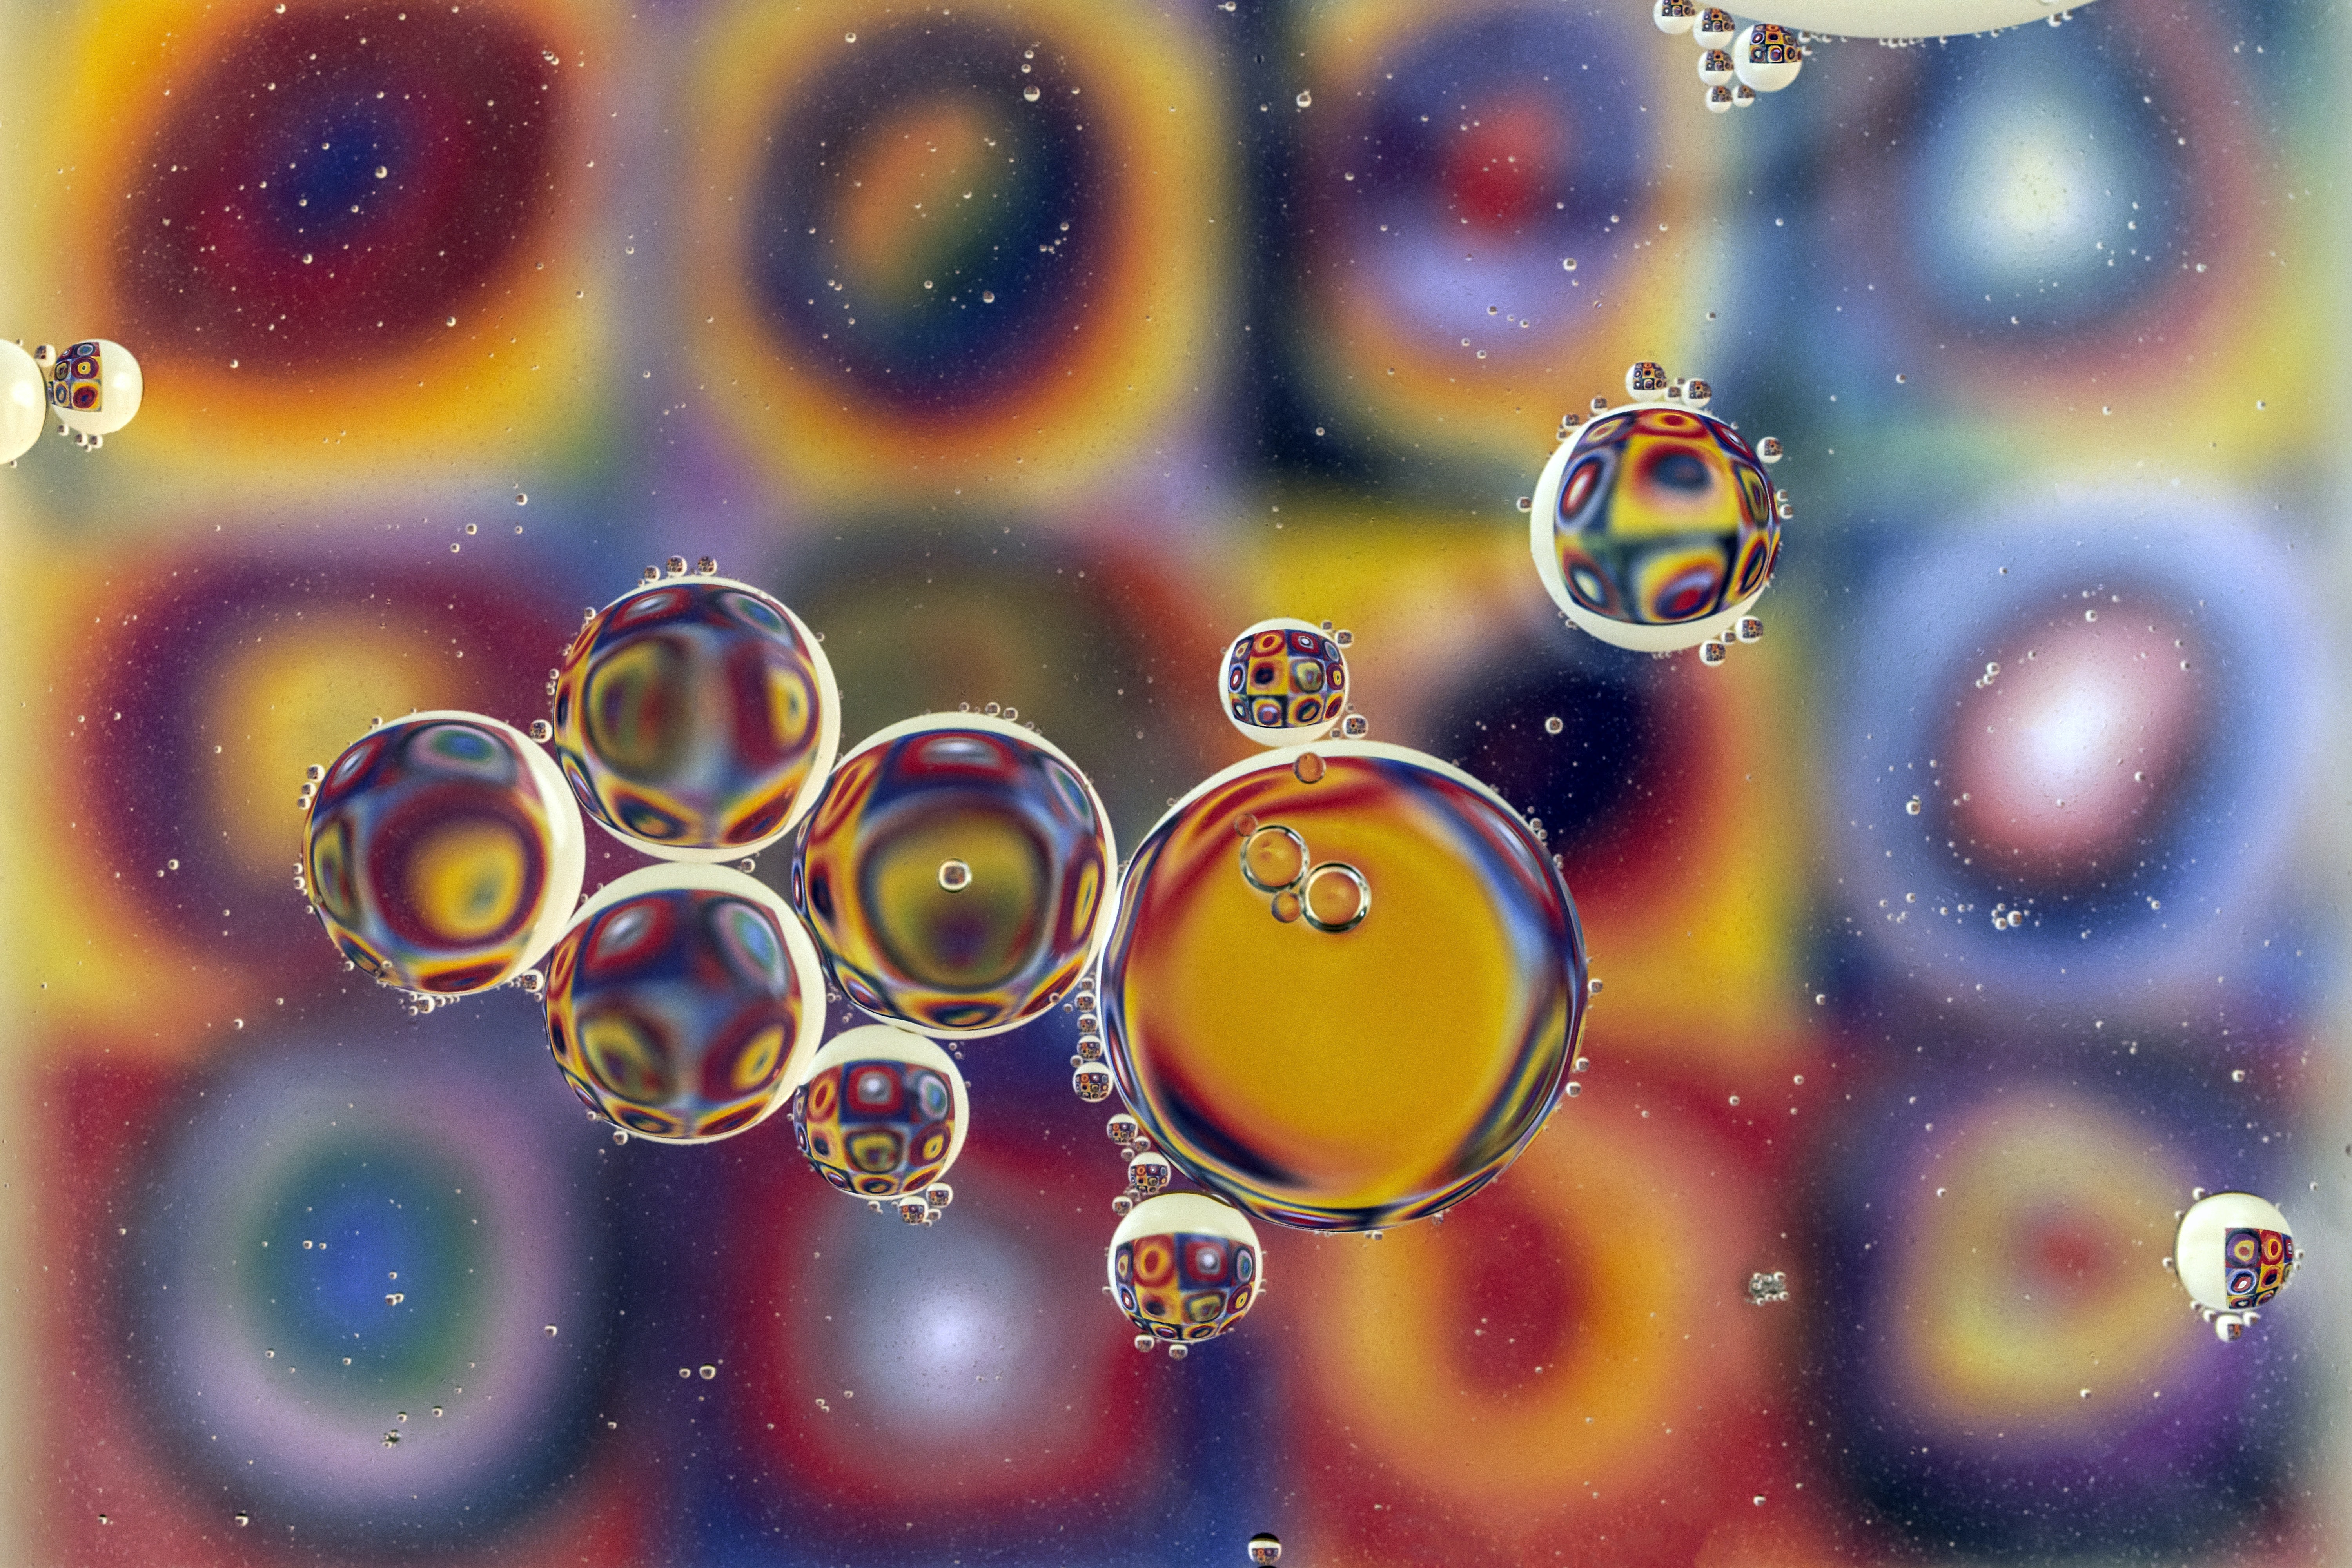 Wallpaper Full HD motley, abstract, multicolored, water, bubbles, blur, smooth